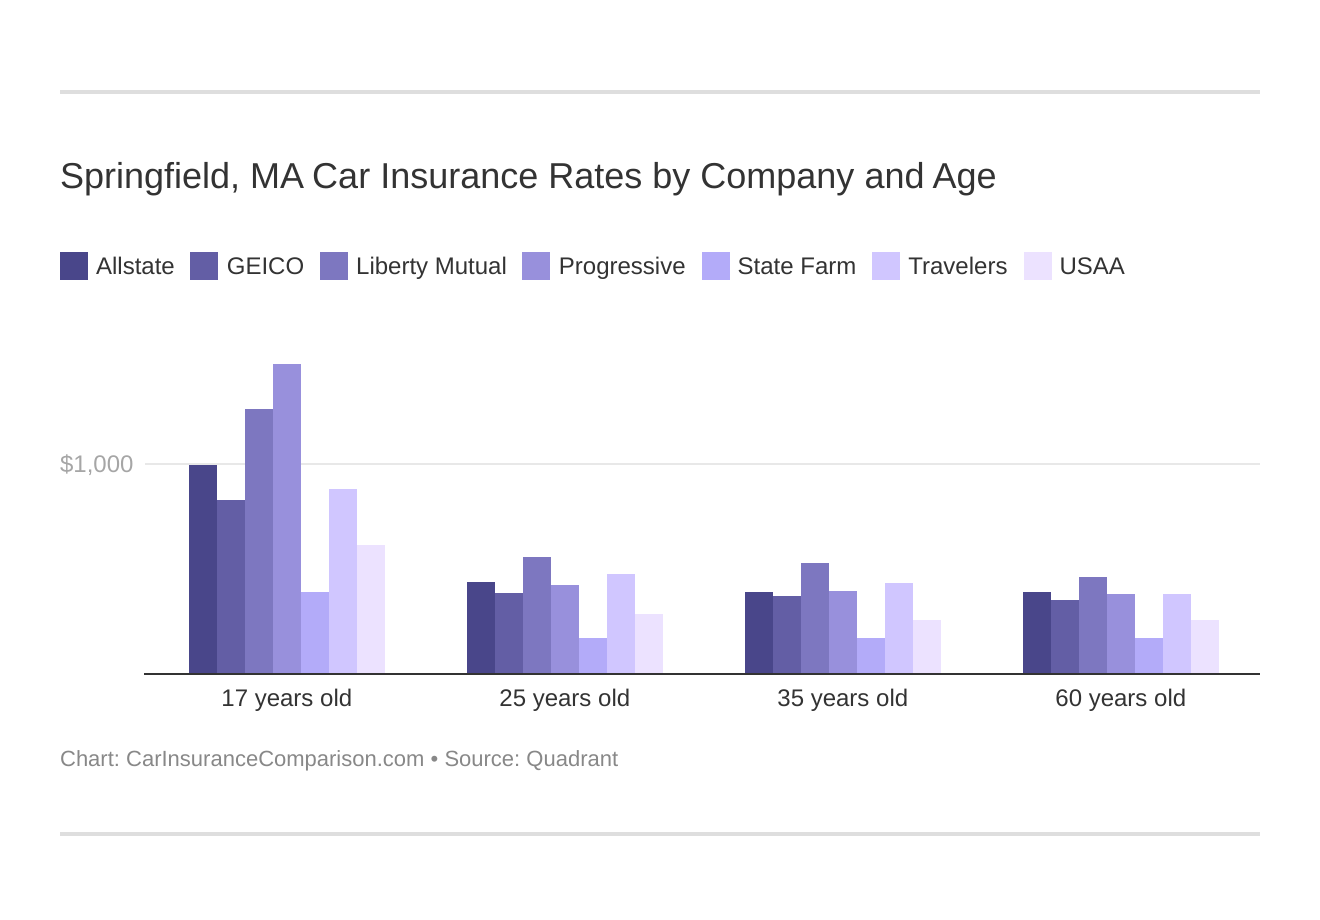 Springfield, MA Car Insurance Rates by Company and Age